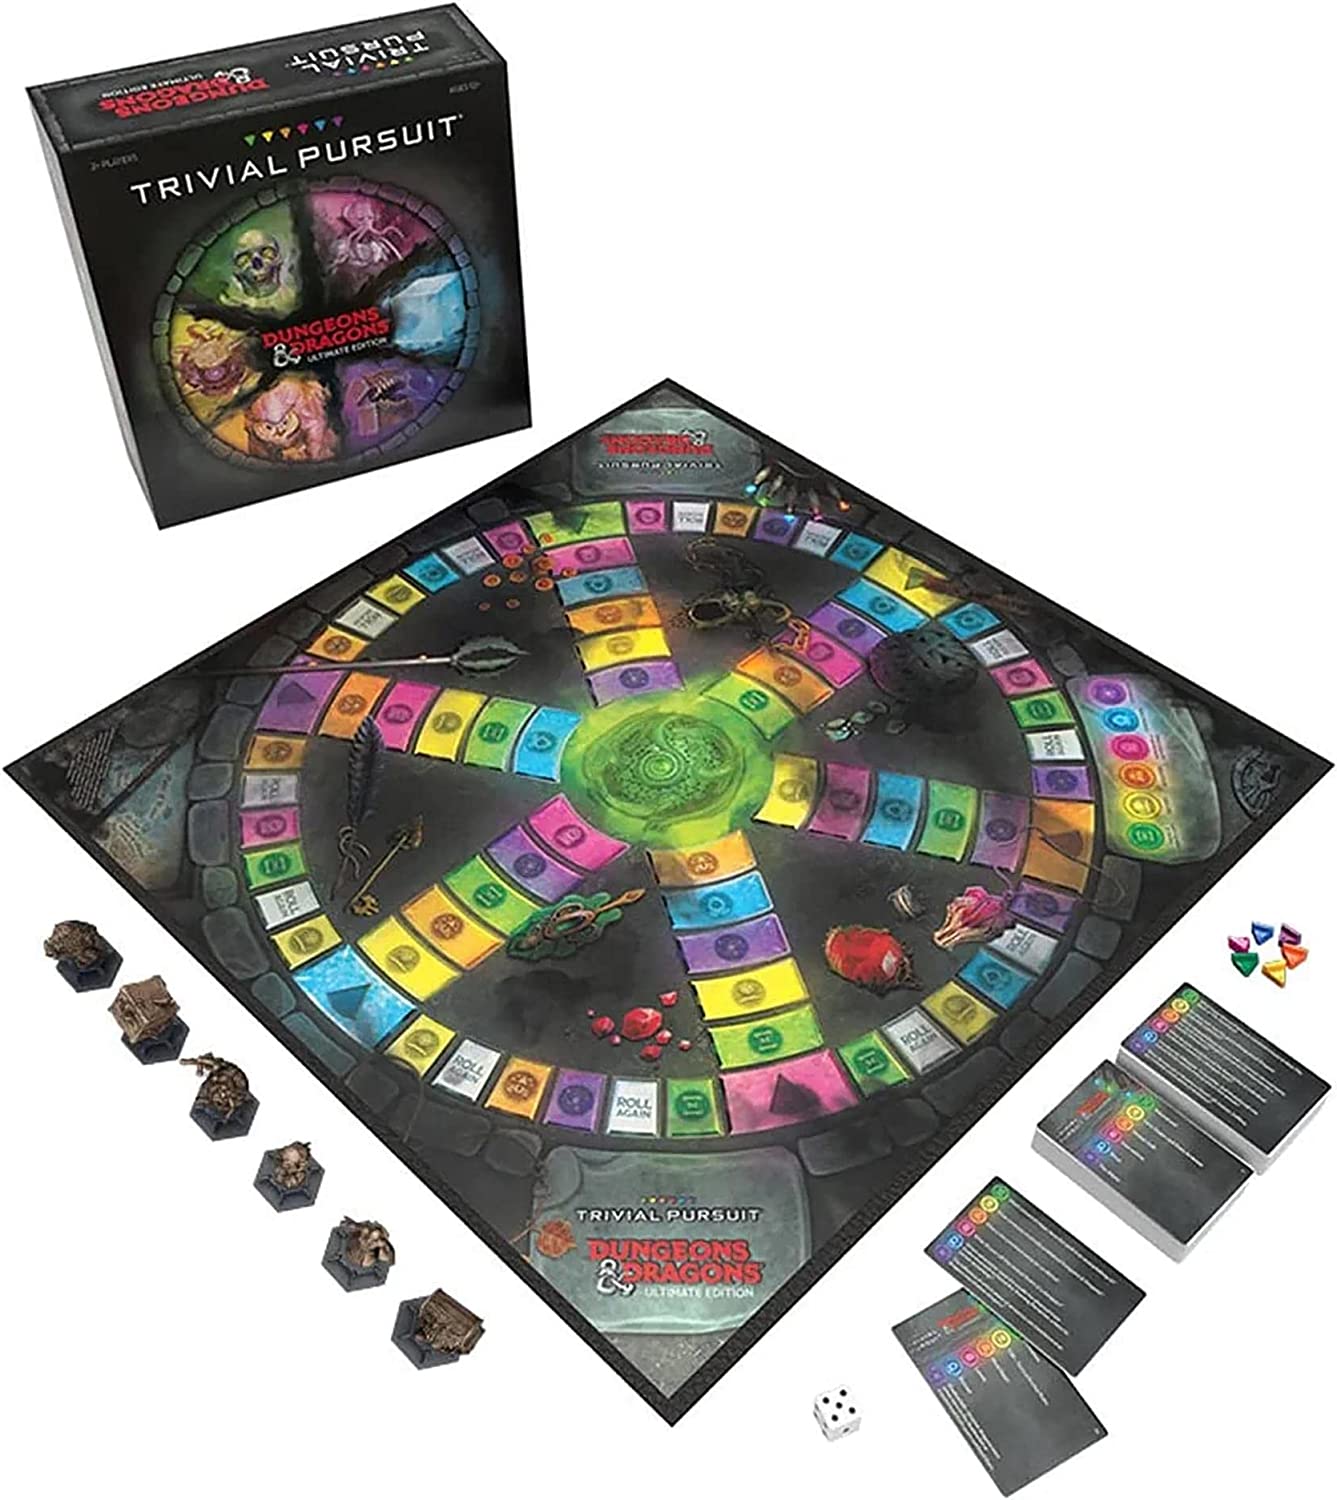  Dungeons & Dragons Trivial Pursuit: Ultimate Edition box and contents